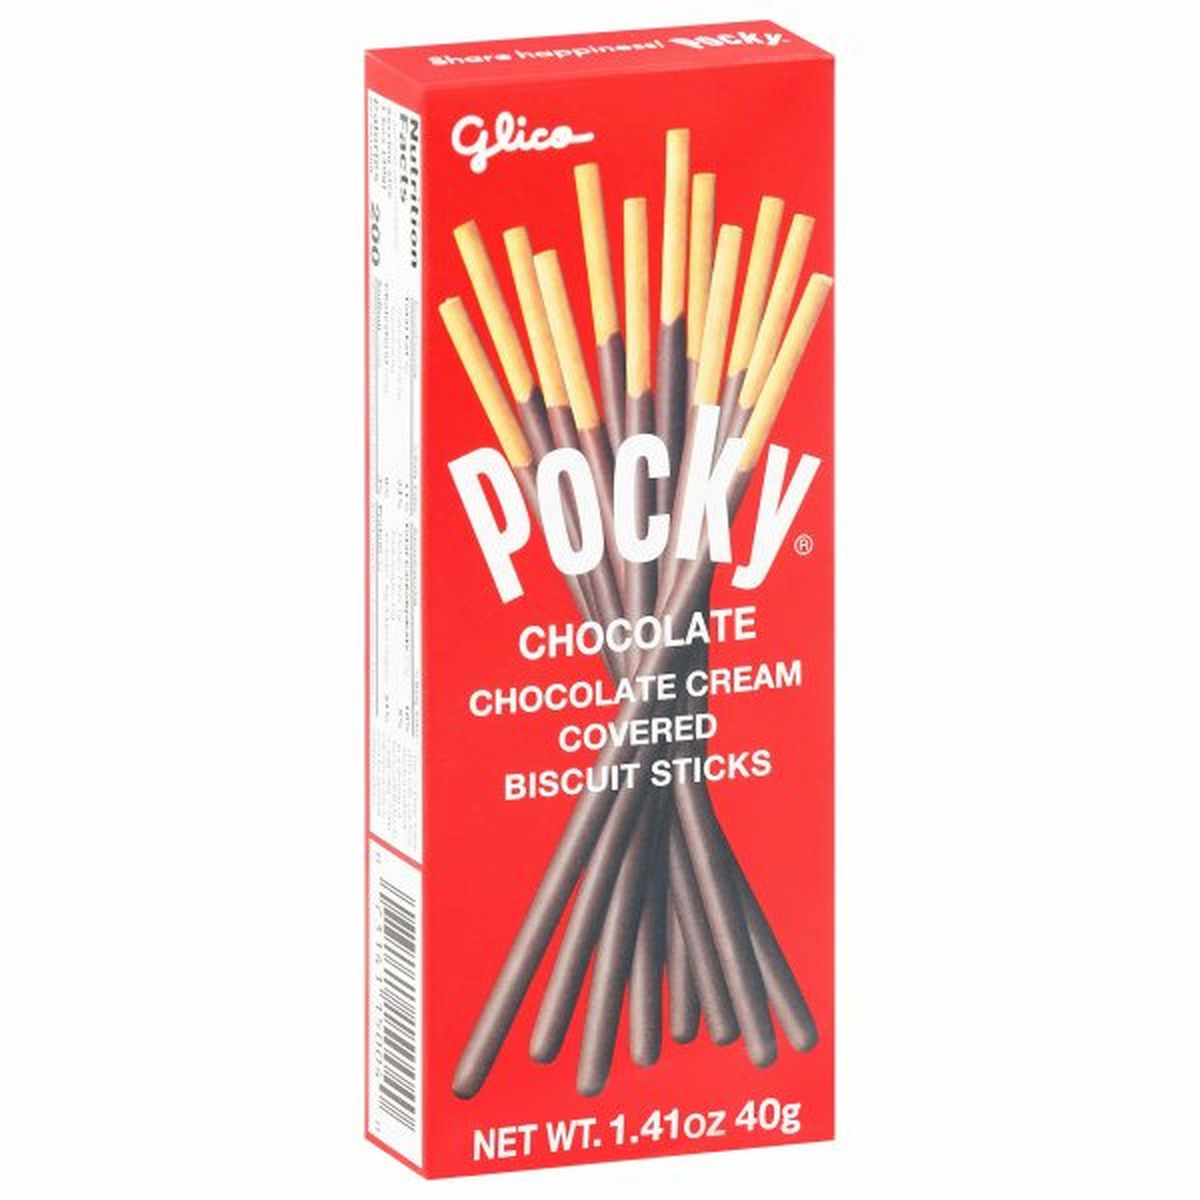 Calories in Pocky Biscuit Sticks, Chocolate